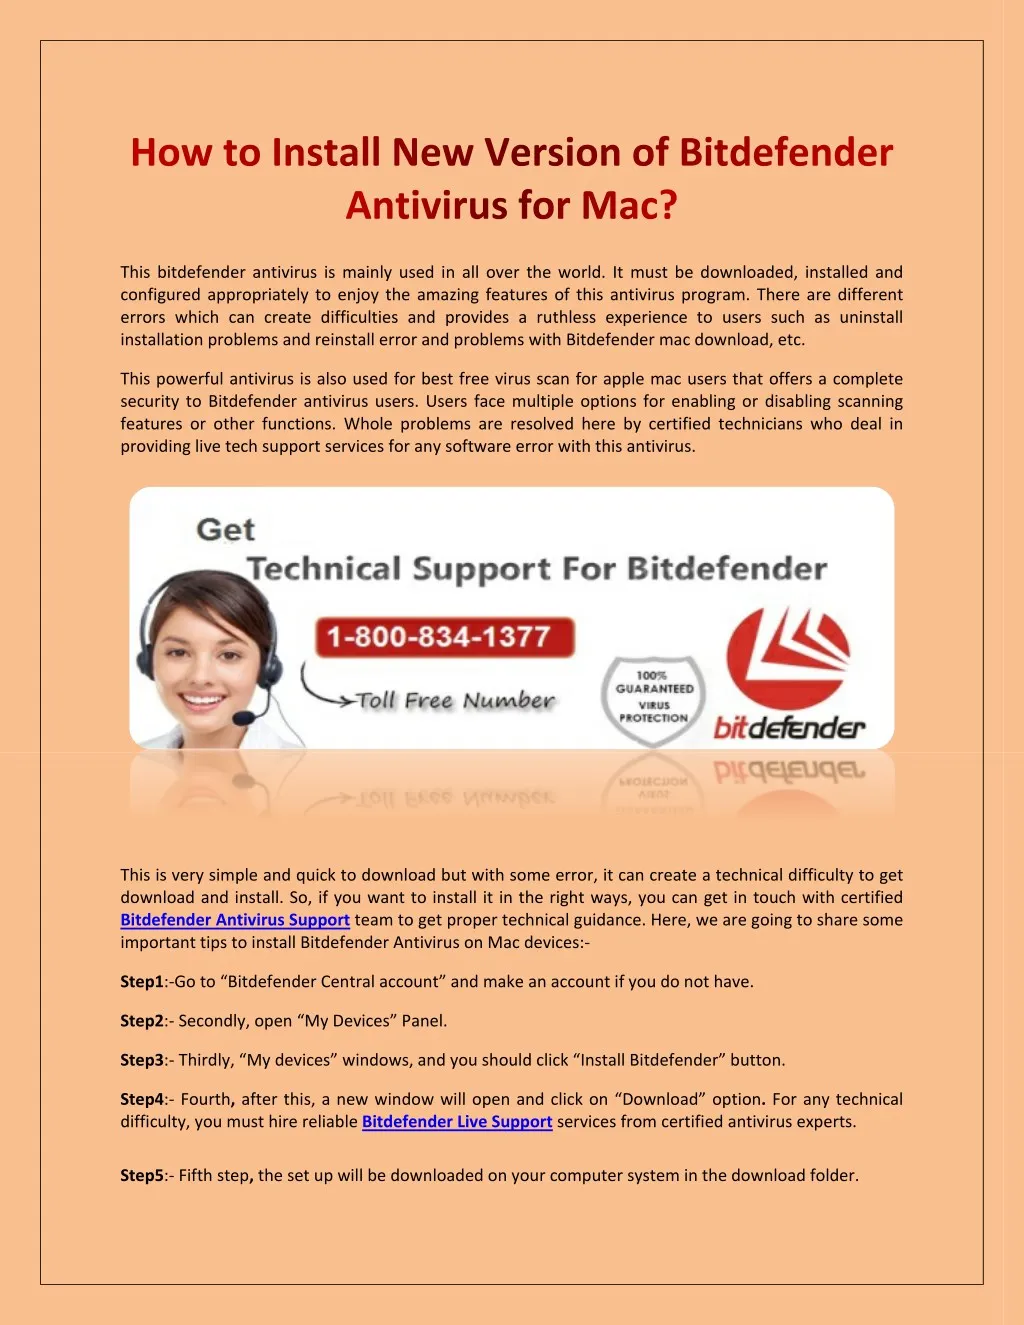 how to install new version of bitdefender